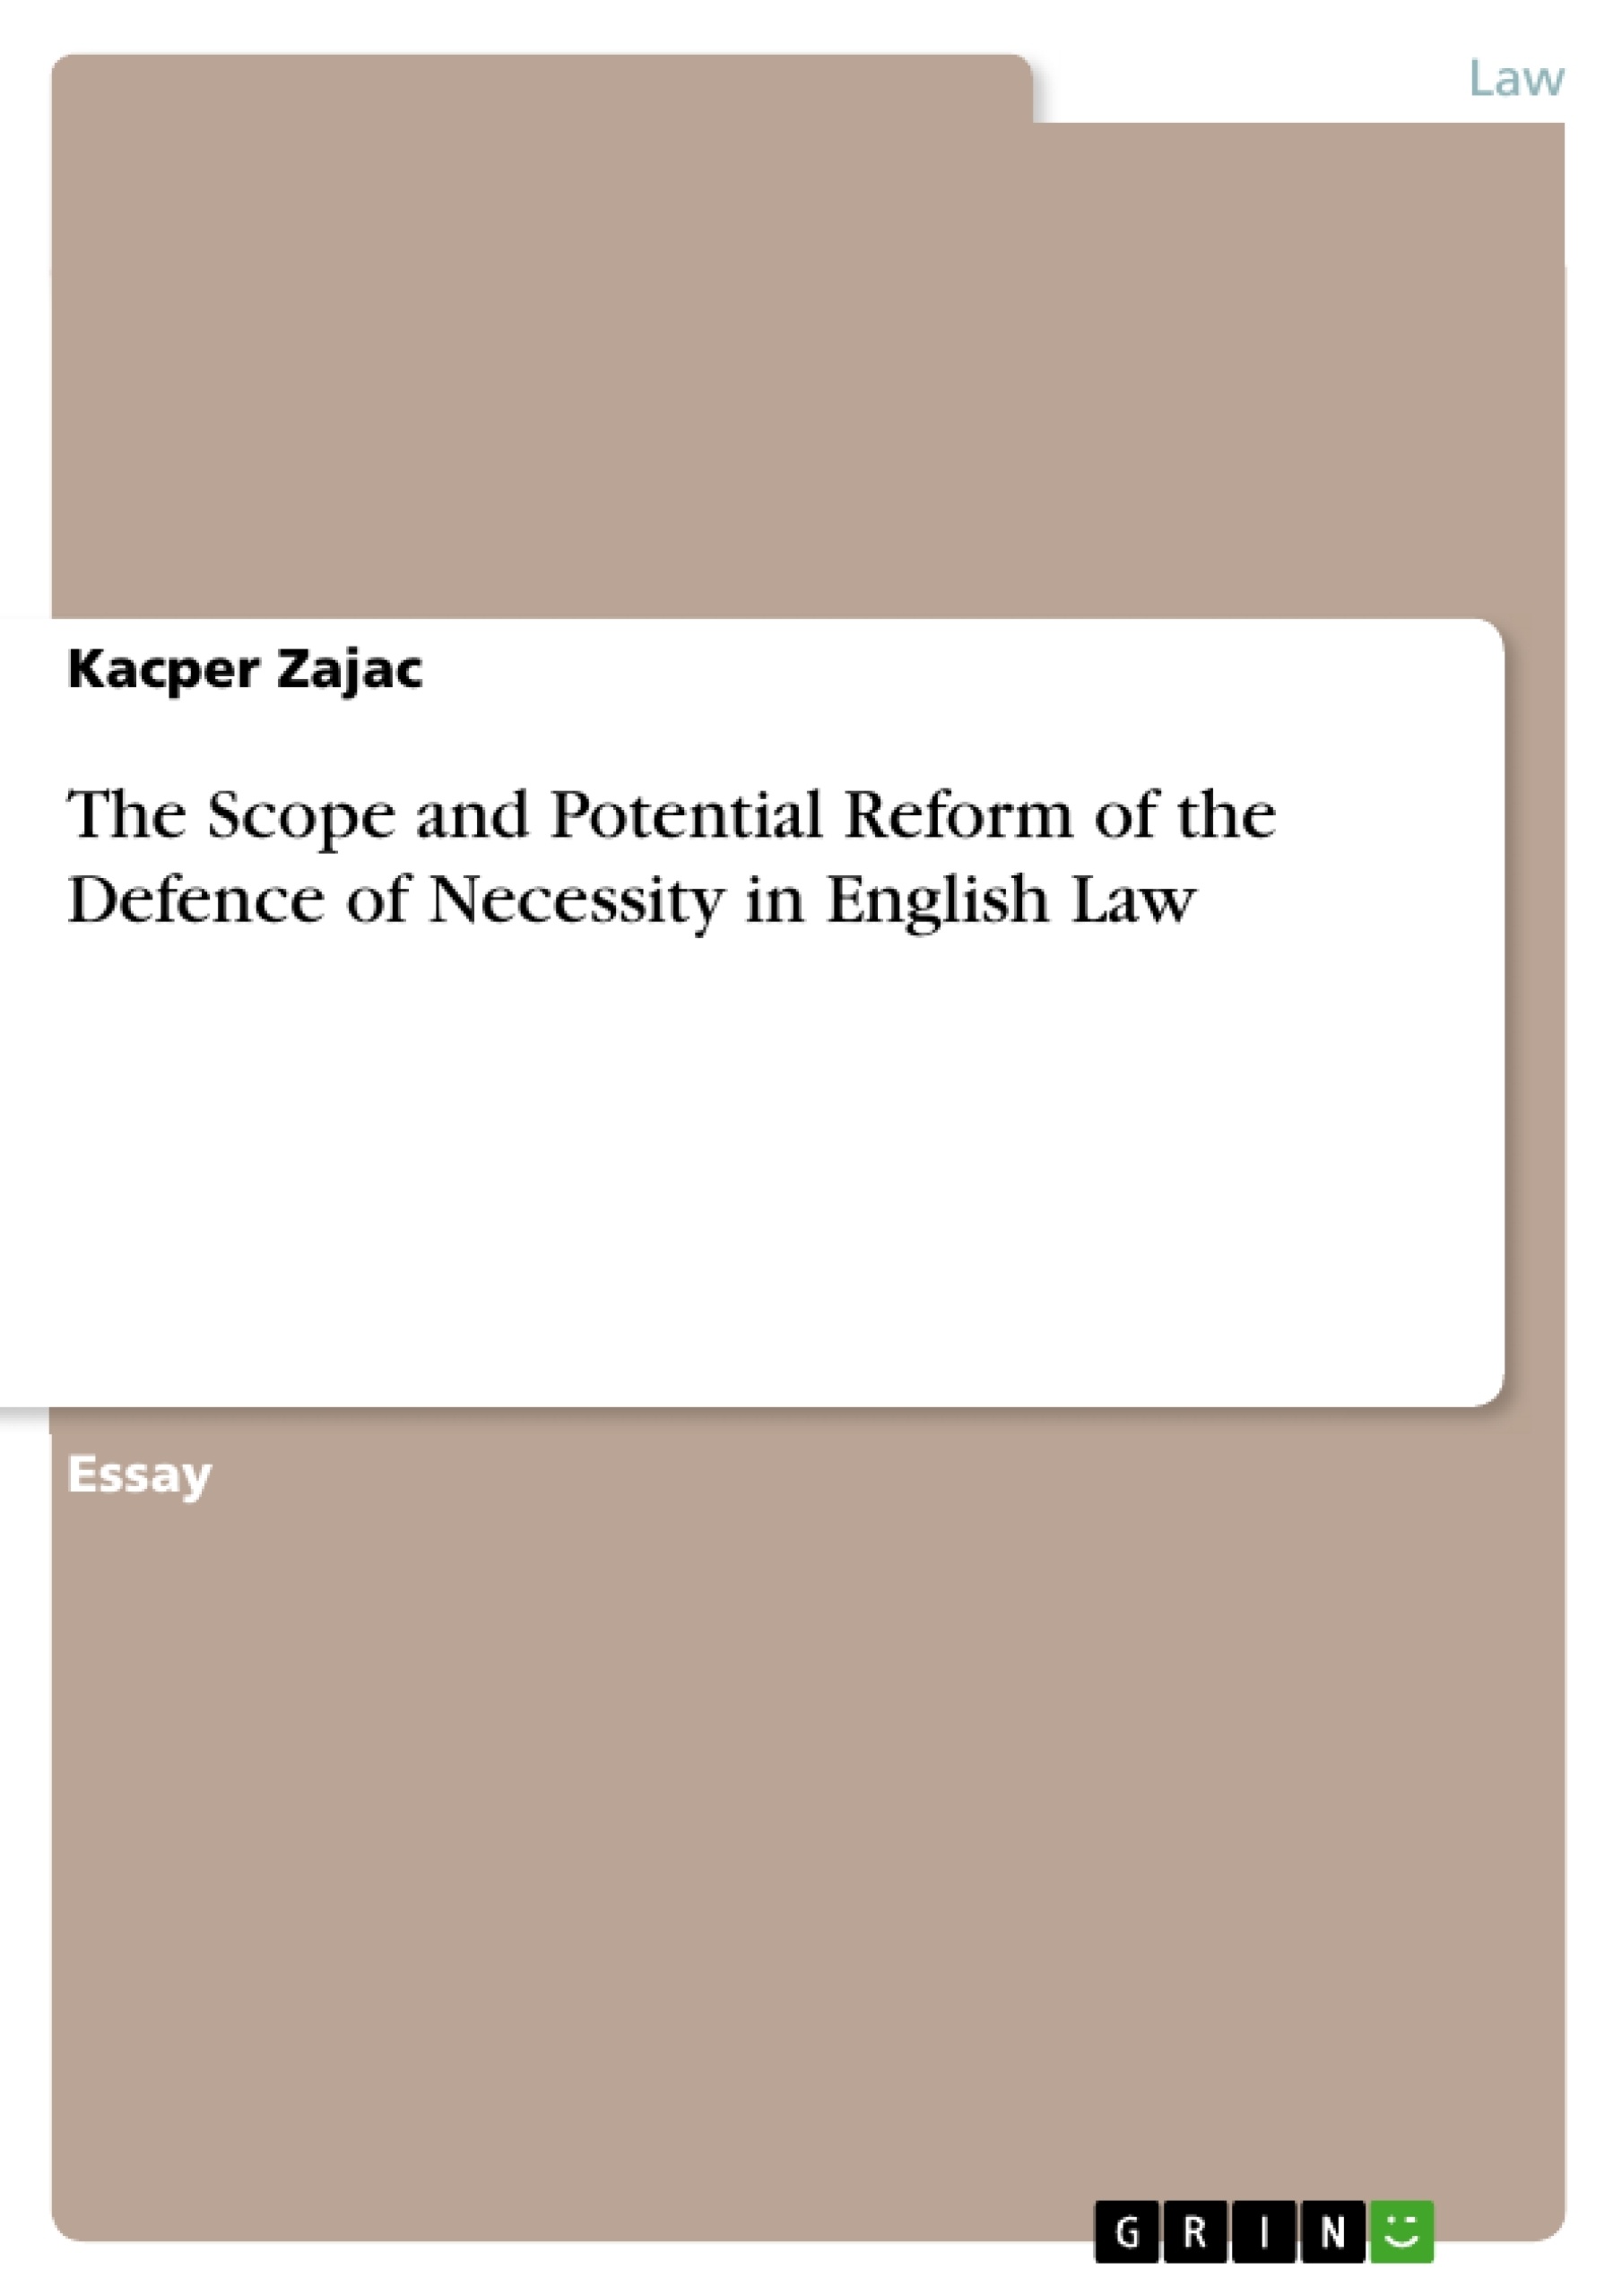 Título: The Scope and Potential Reform of the Defence of Necessity in English Law